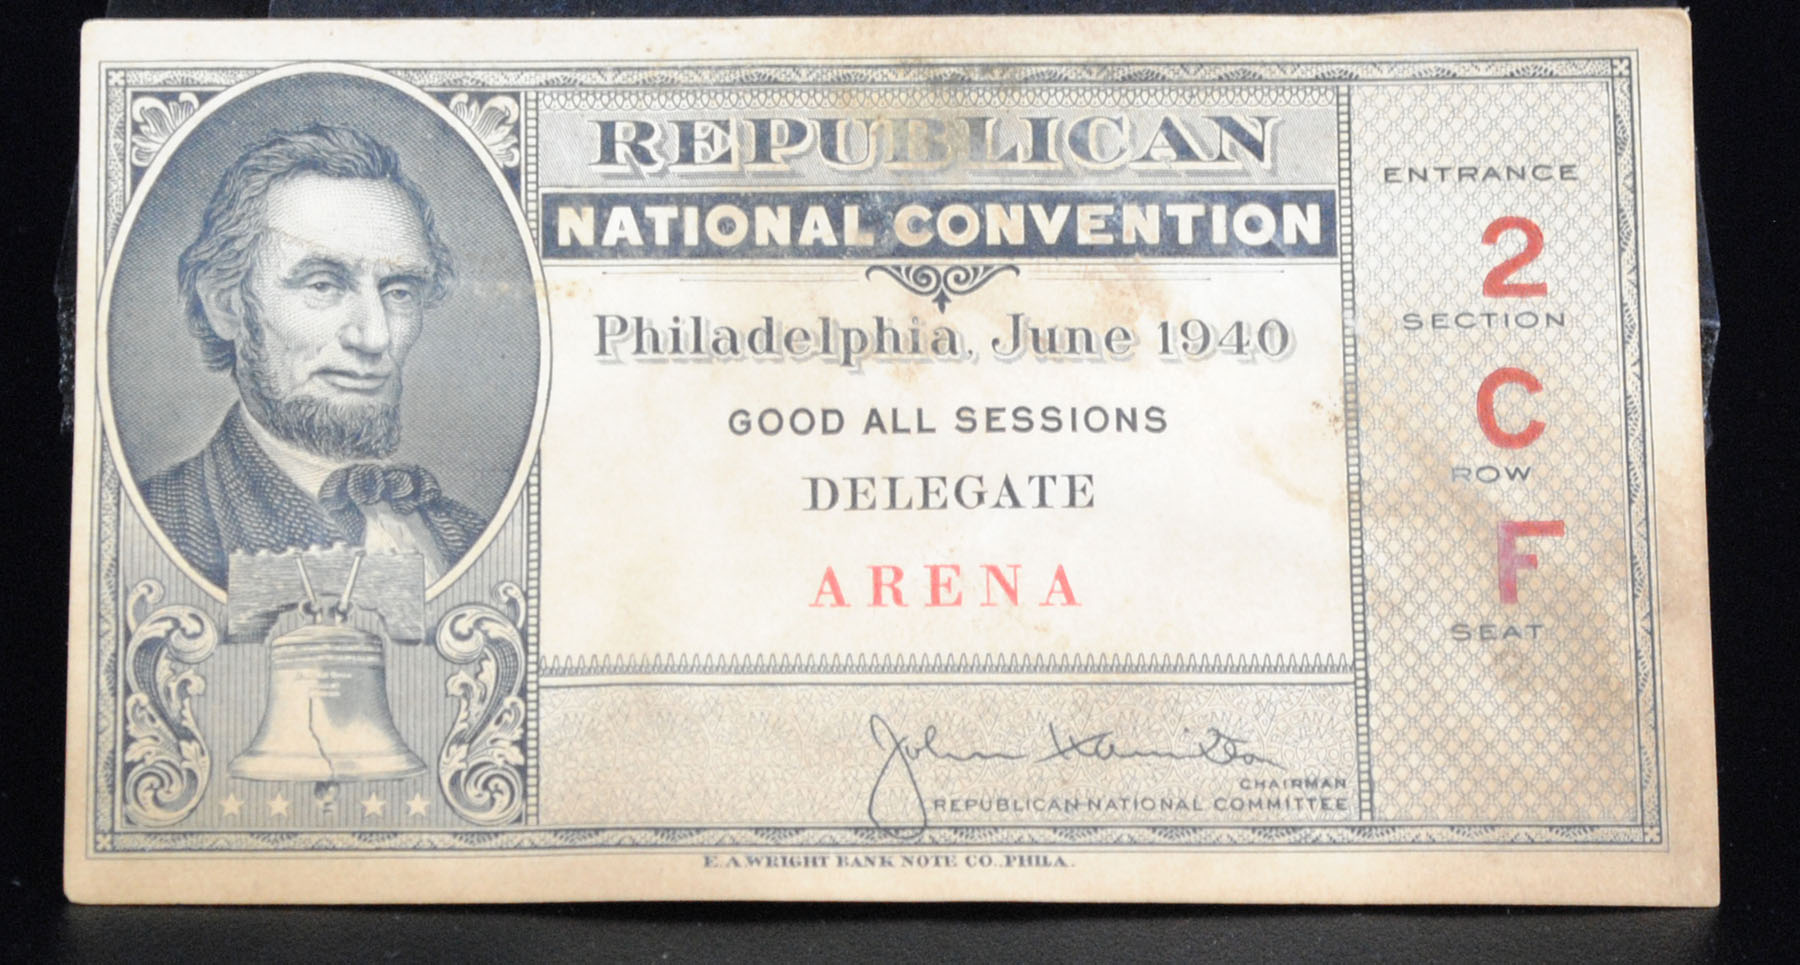 John W. Bricker’s Ticket to the Republican National Convention  